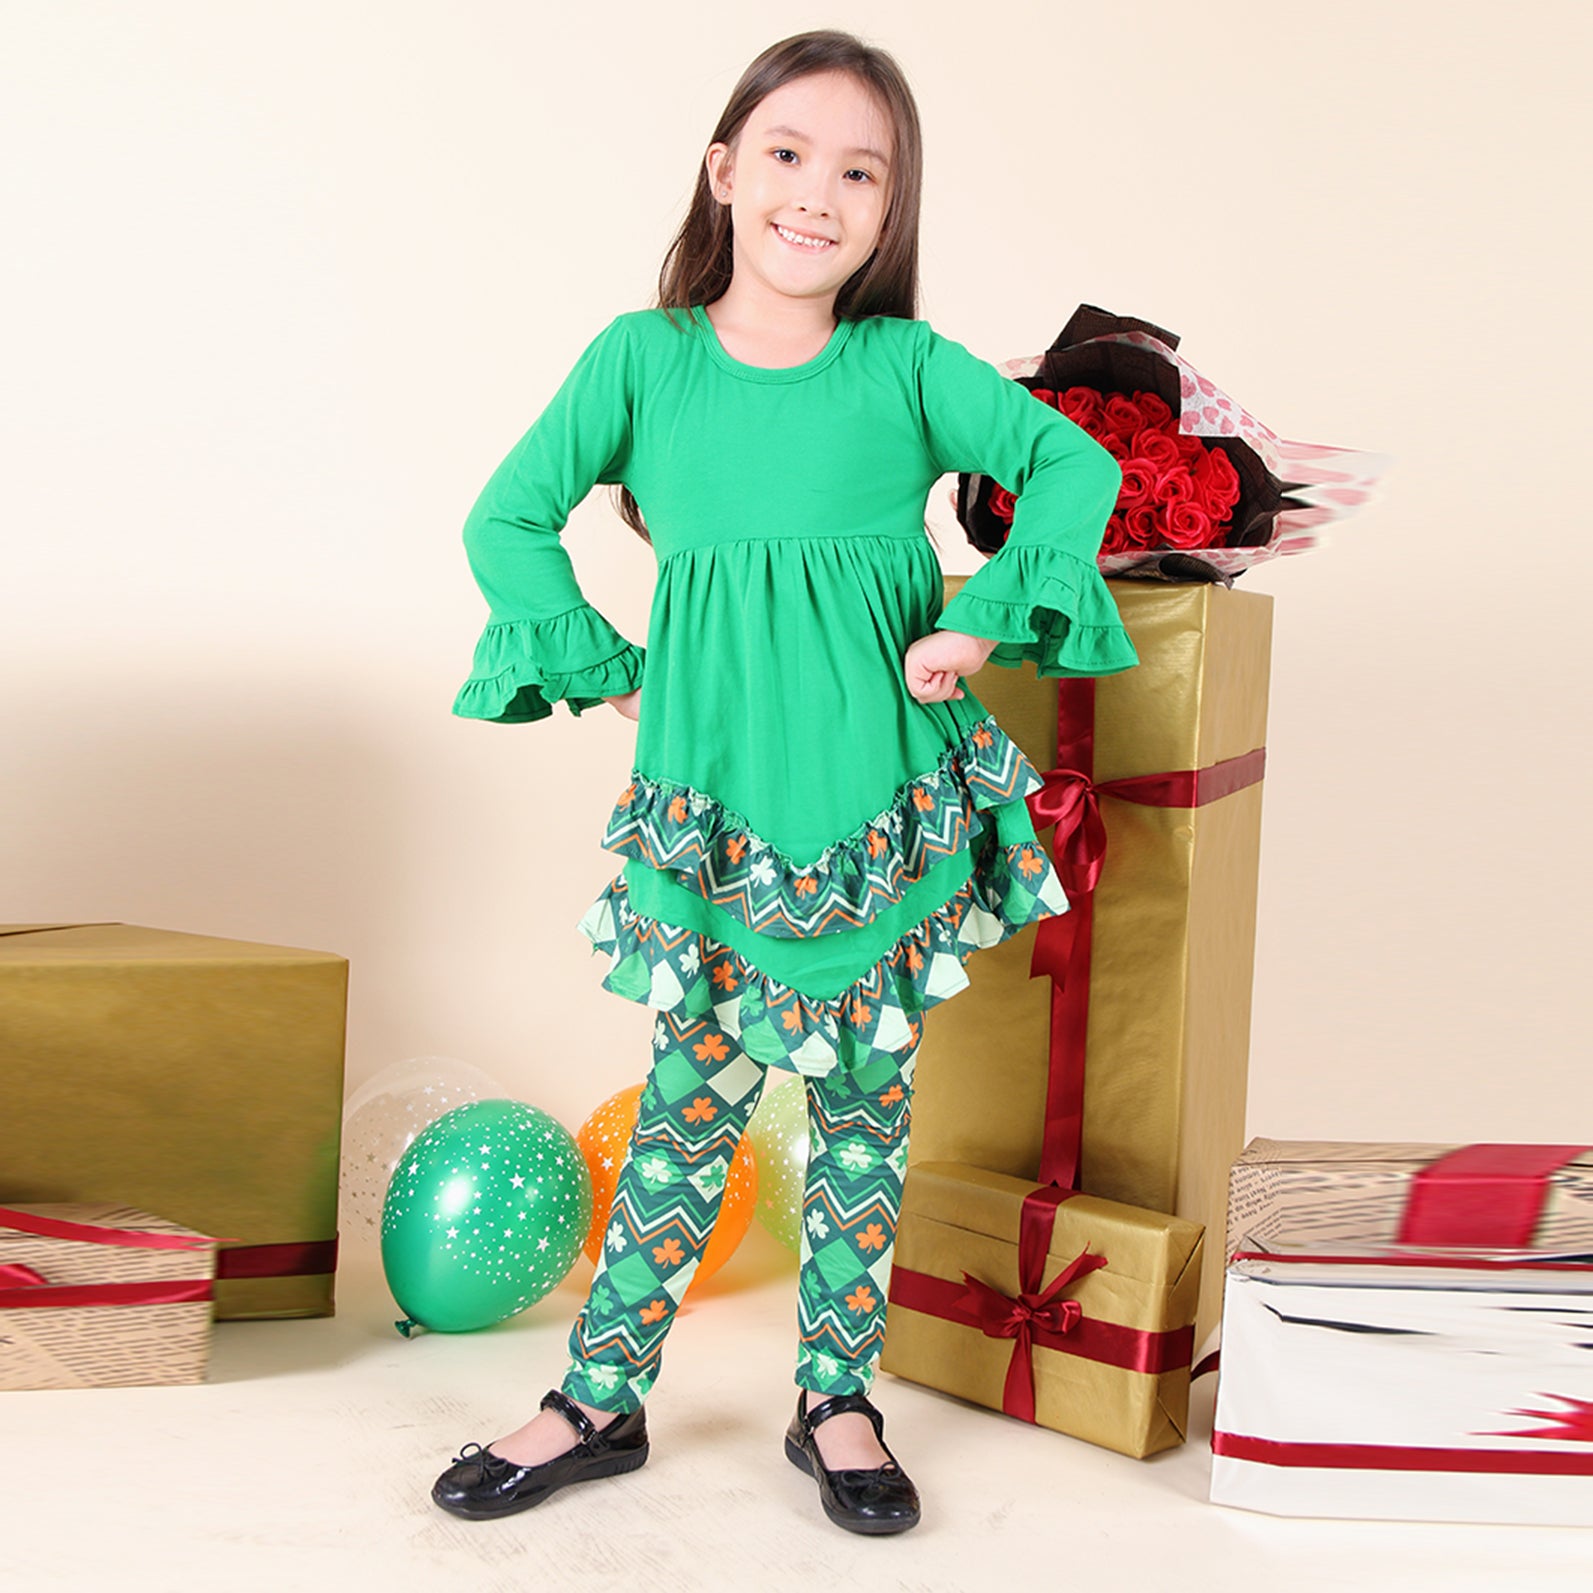 Baby Toddler Little Girl St Patricks Day Shamrock Clover Scarf Outfit - ZigZag/Green - Angeline Kids